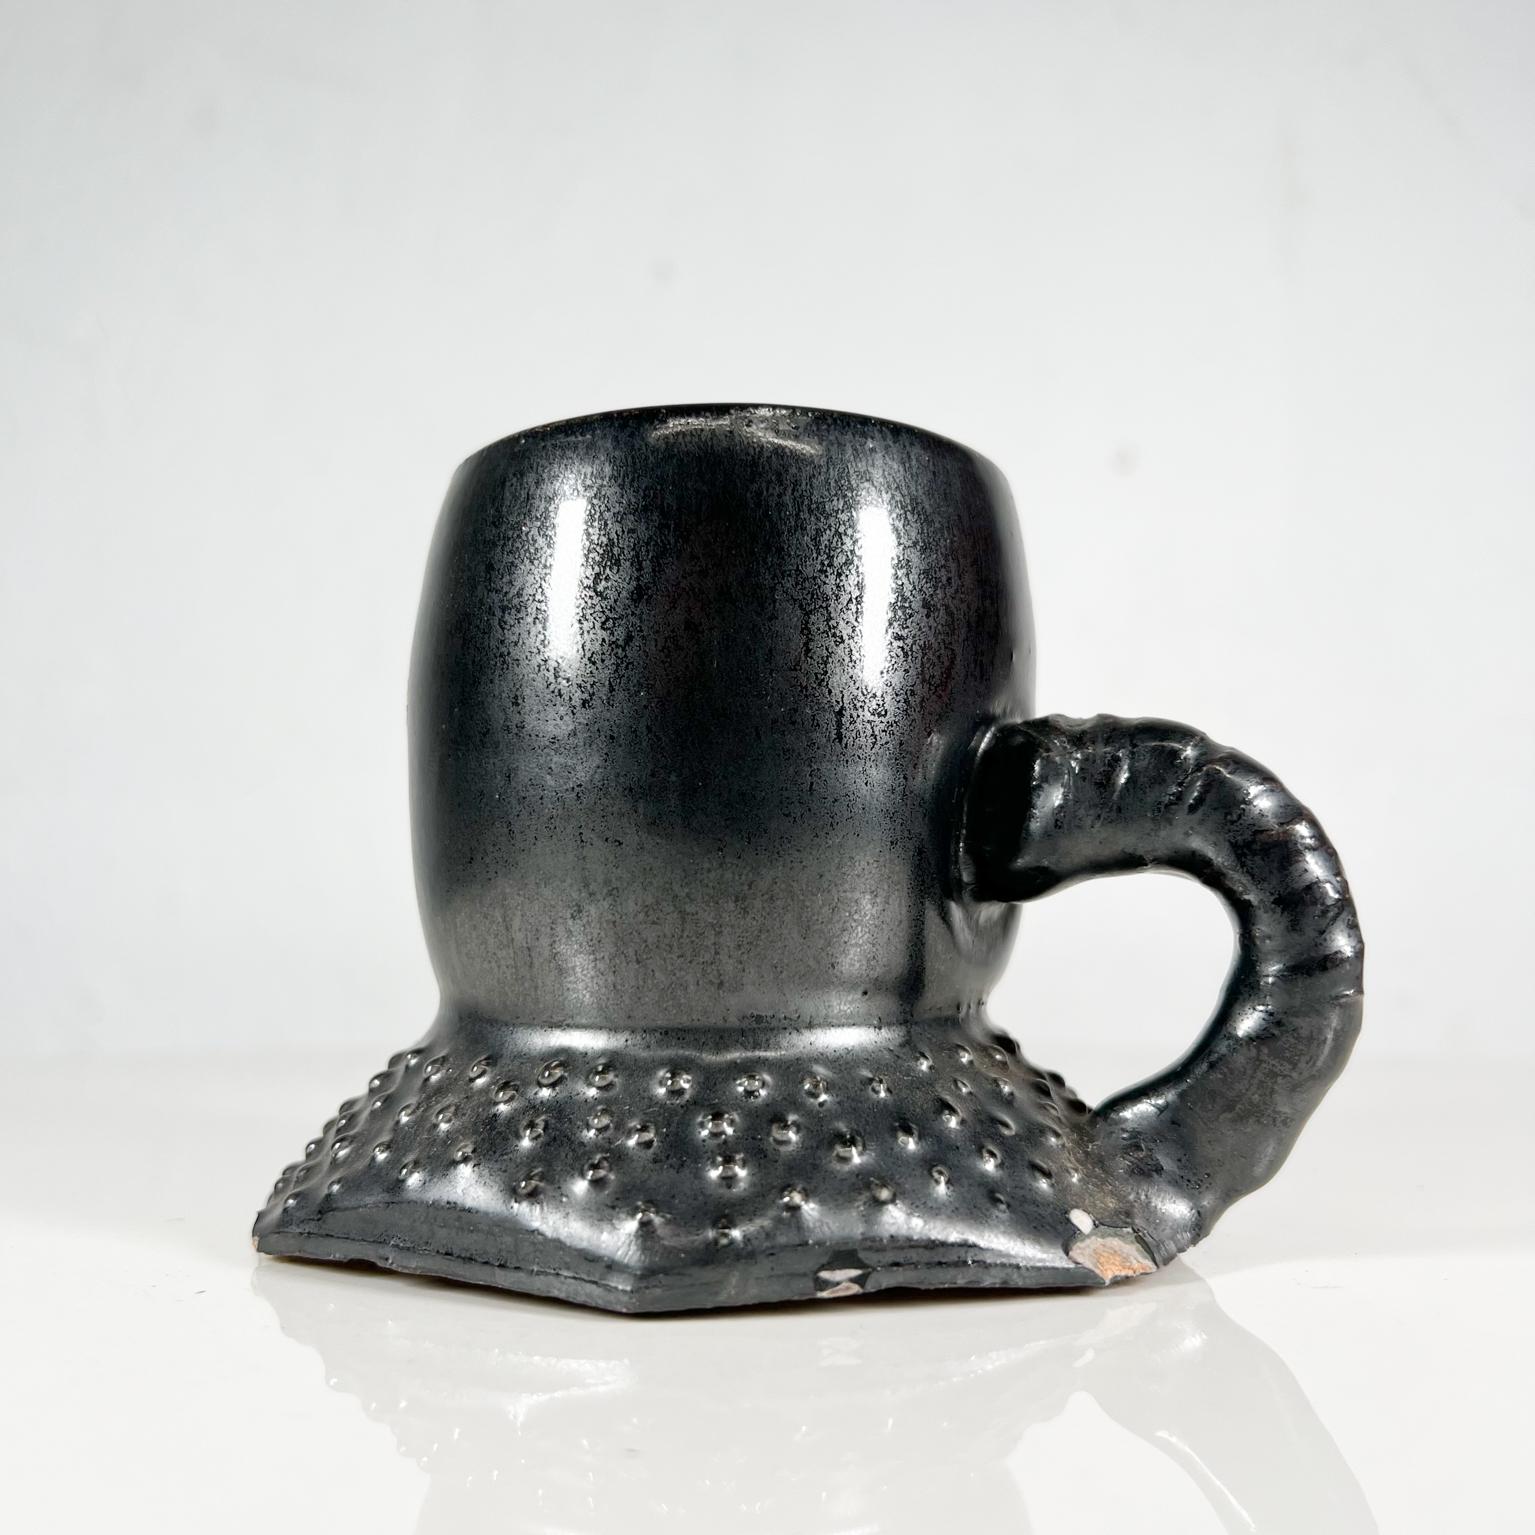 1980s black pottery art coffee cup mug vintage condition
Artist signed Melching 1983
Measures: 3 tall x 3.63 width x 5 depth
Unrestored vintage condition with chipping.
Please see all images.
  